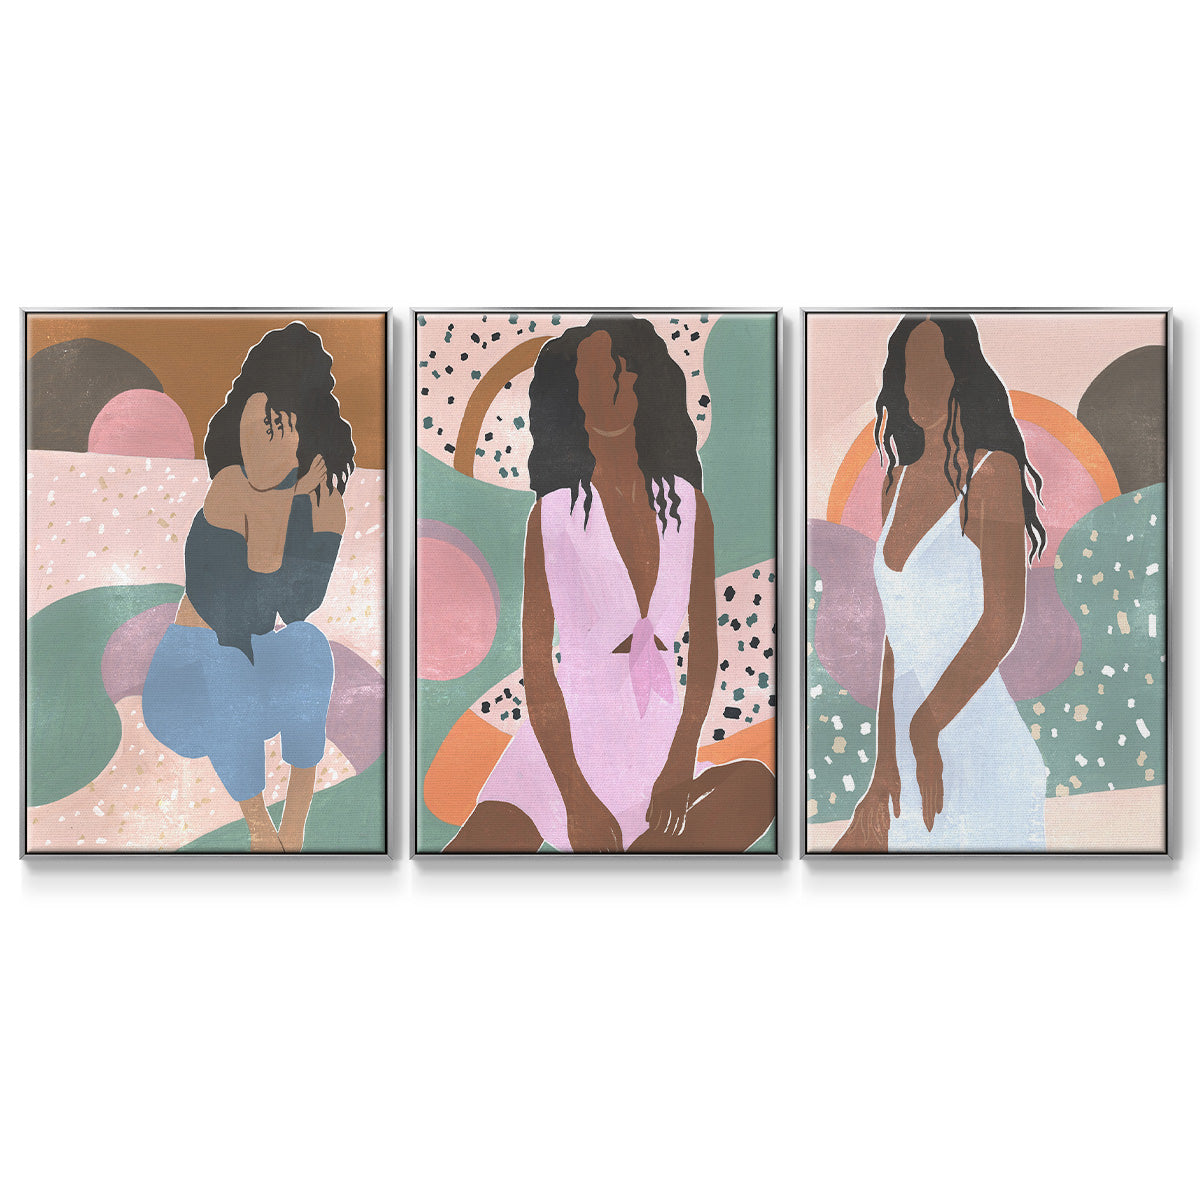 Curly Lady I - Framed Premium Gallery Wrapped Canvas L Frame 3 Piece Set - Ready to Hang